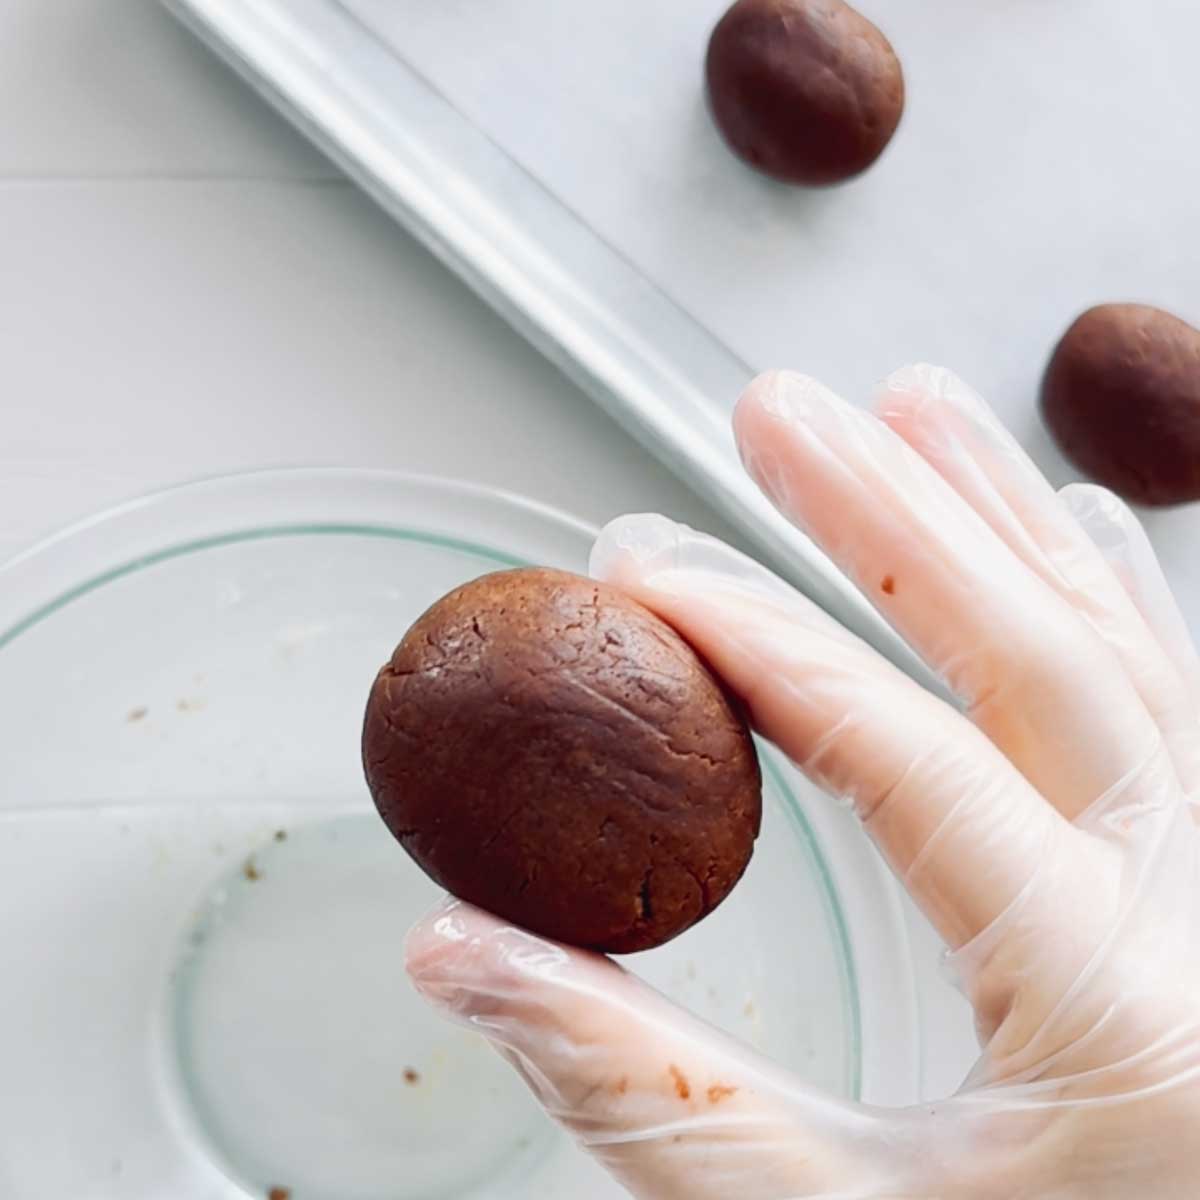 Healthier Nutella Chocolate Easter Eggs Made with PB Powder - Nutella Chocolate Easter Eggs